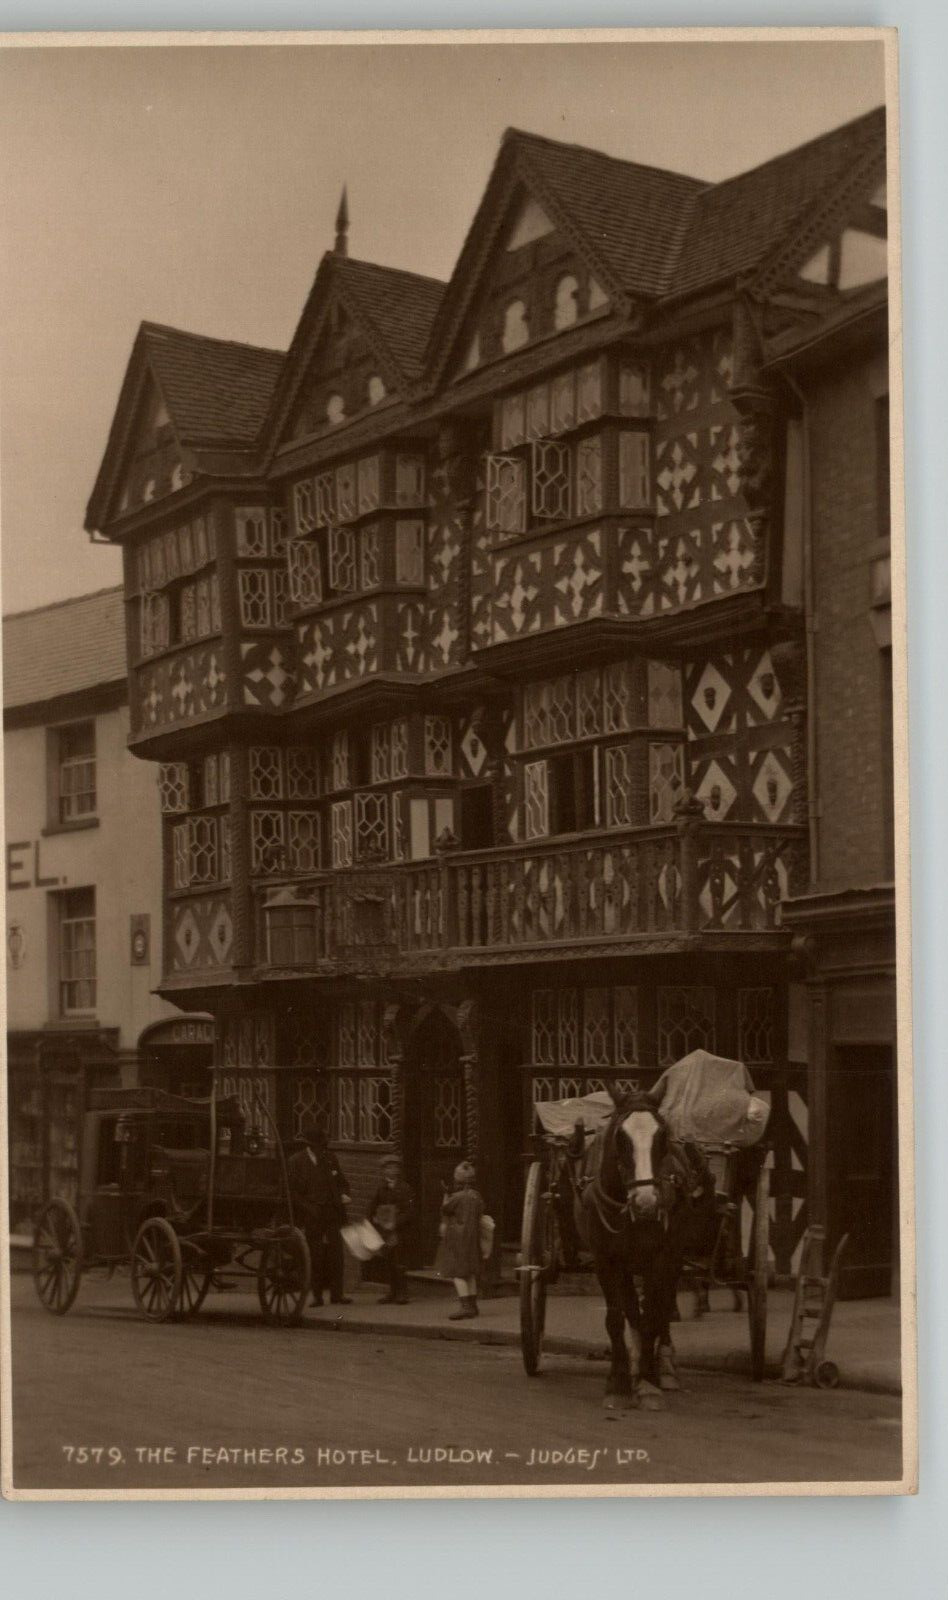 RPPC Postcard - The Feathers Hotel - Ludlow - Judges Hastings